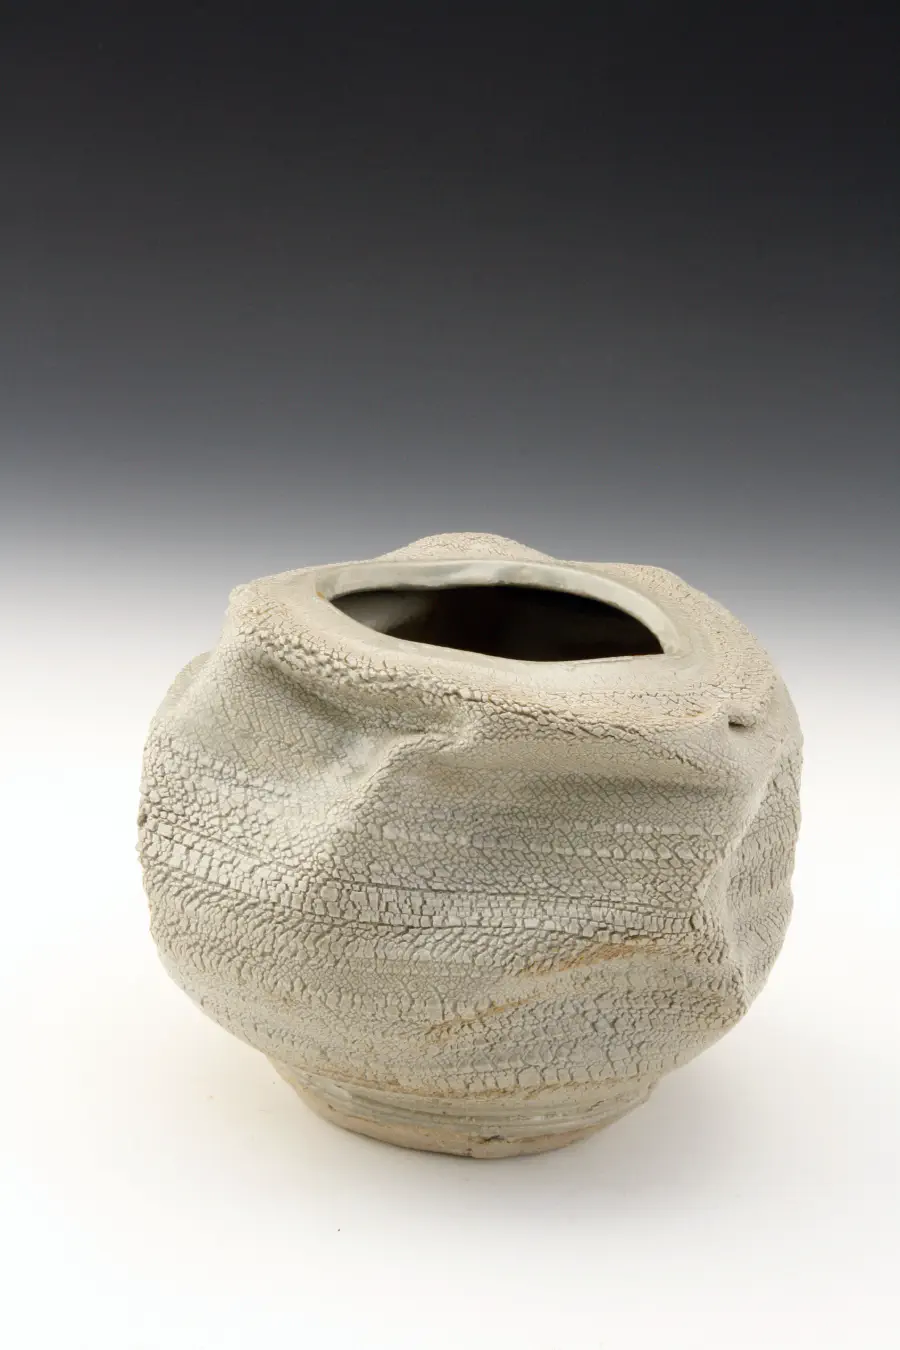 A textured creamy white vase that looks as if it's crumpled. The background is a gradient of black to white.